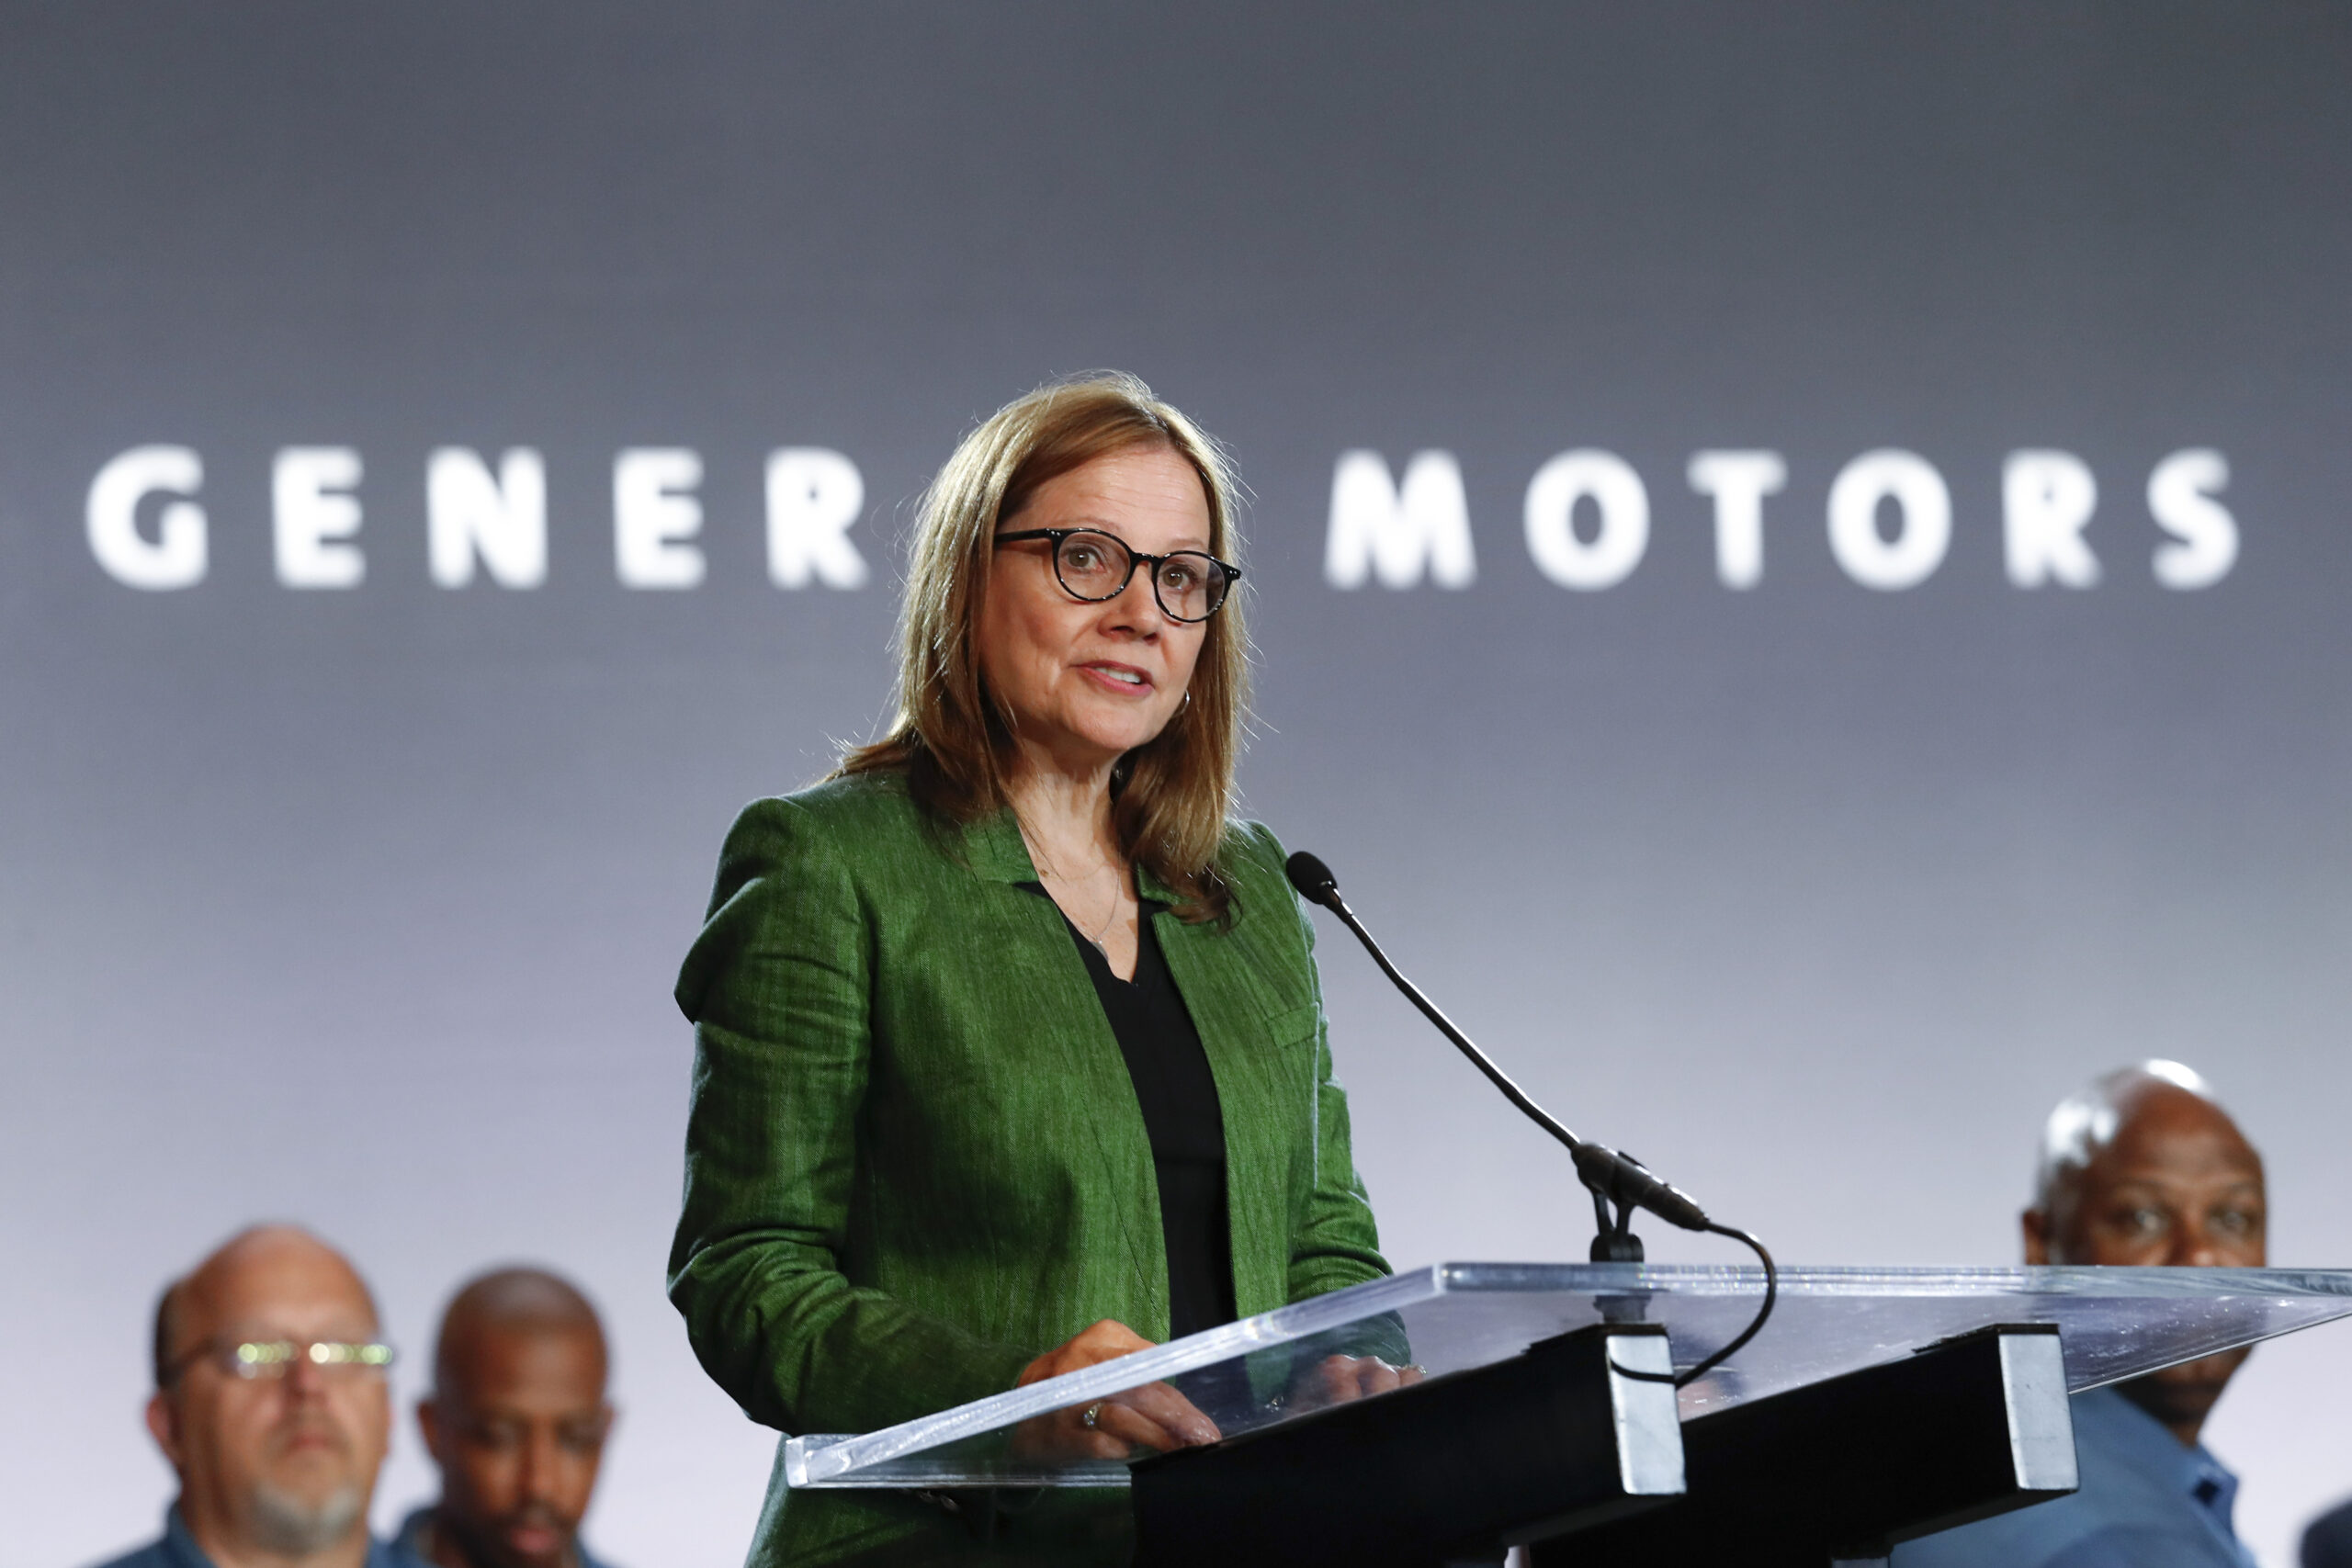 A woman in a green jacket at a podium in front of a general motors sign.